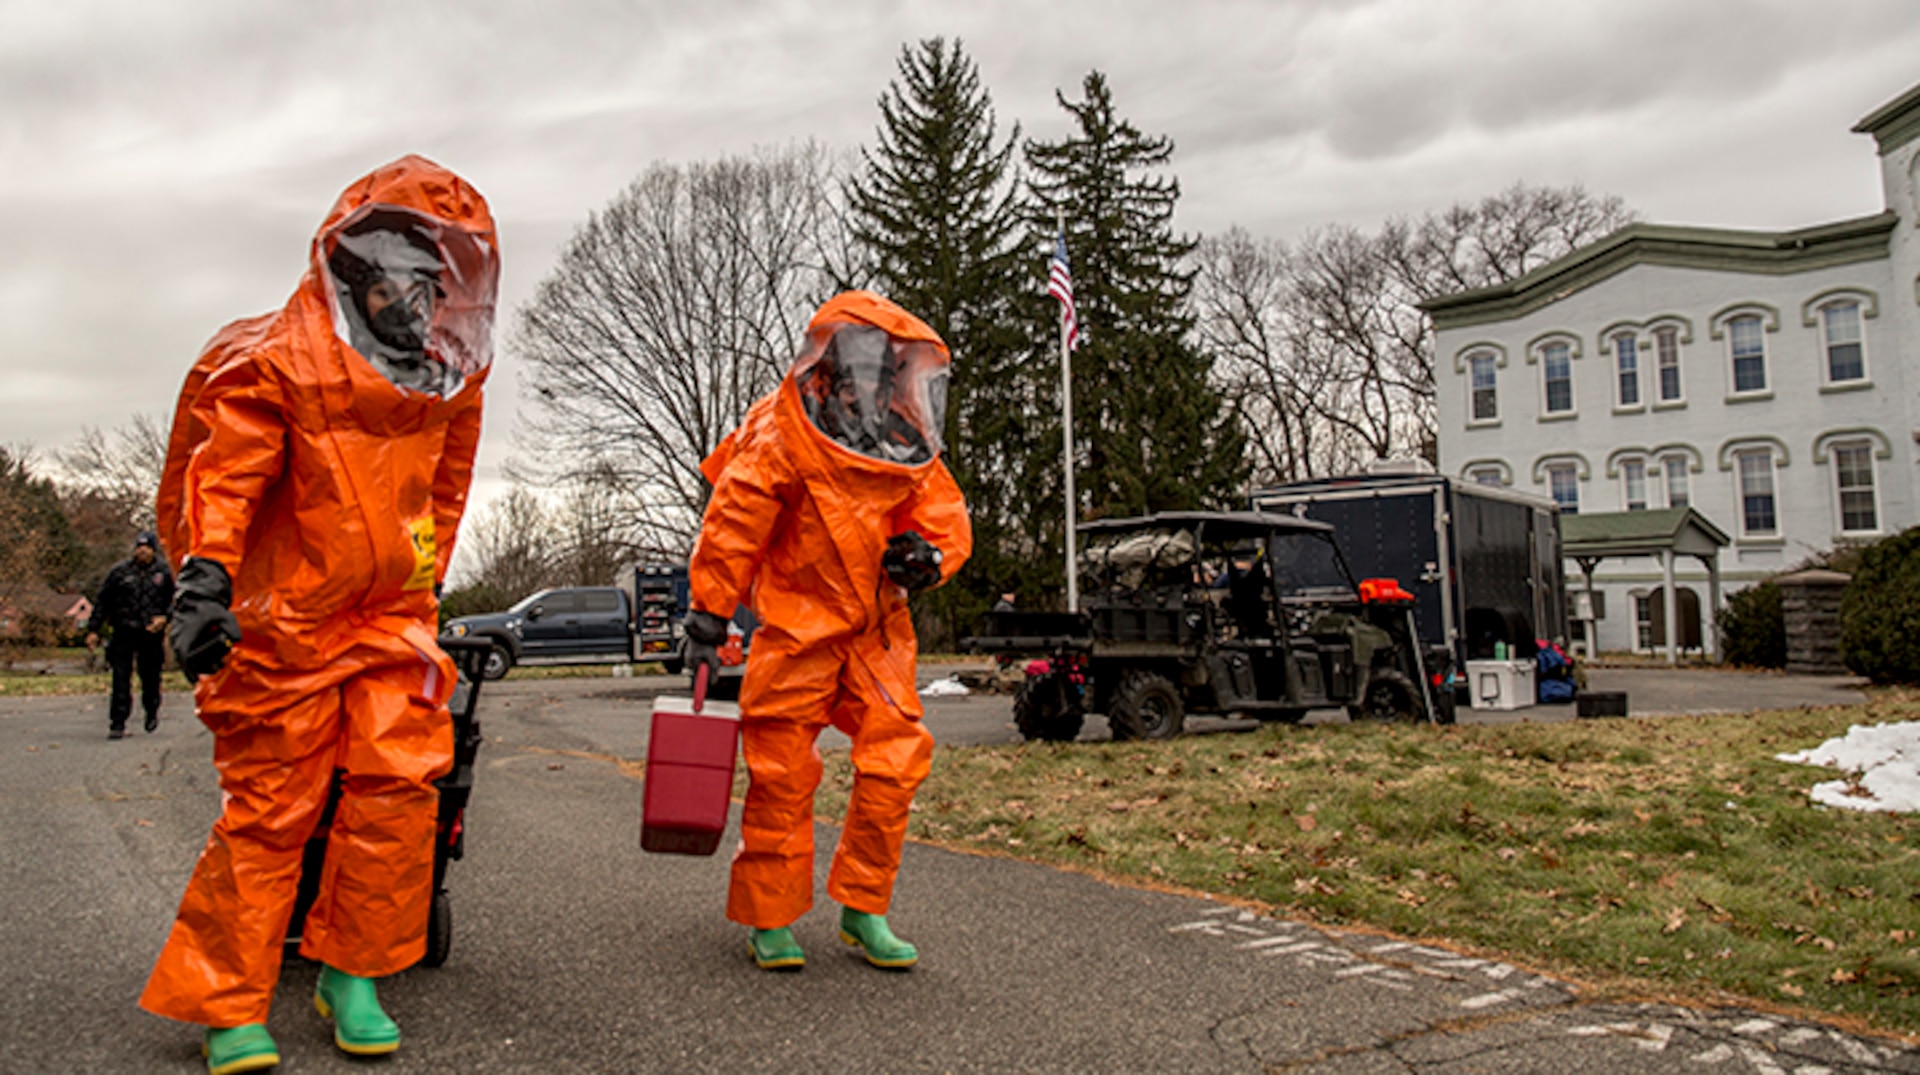 U.S. Army Staff Sgt. Kristin Northrup, a survey team chief, and Spc. Sean Murray, a survey team member, assigned to the 2nd Weapons of Mass Destruction Civil Support Team (CST), New York National Guard, move to inspect, scan and catalog the contents of a simulated bomb maker's vehicle during a hazardous materials exercise with the City of Kingston Fire Department in Kingston, N.Y., Nov. 28, 2018.